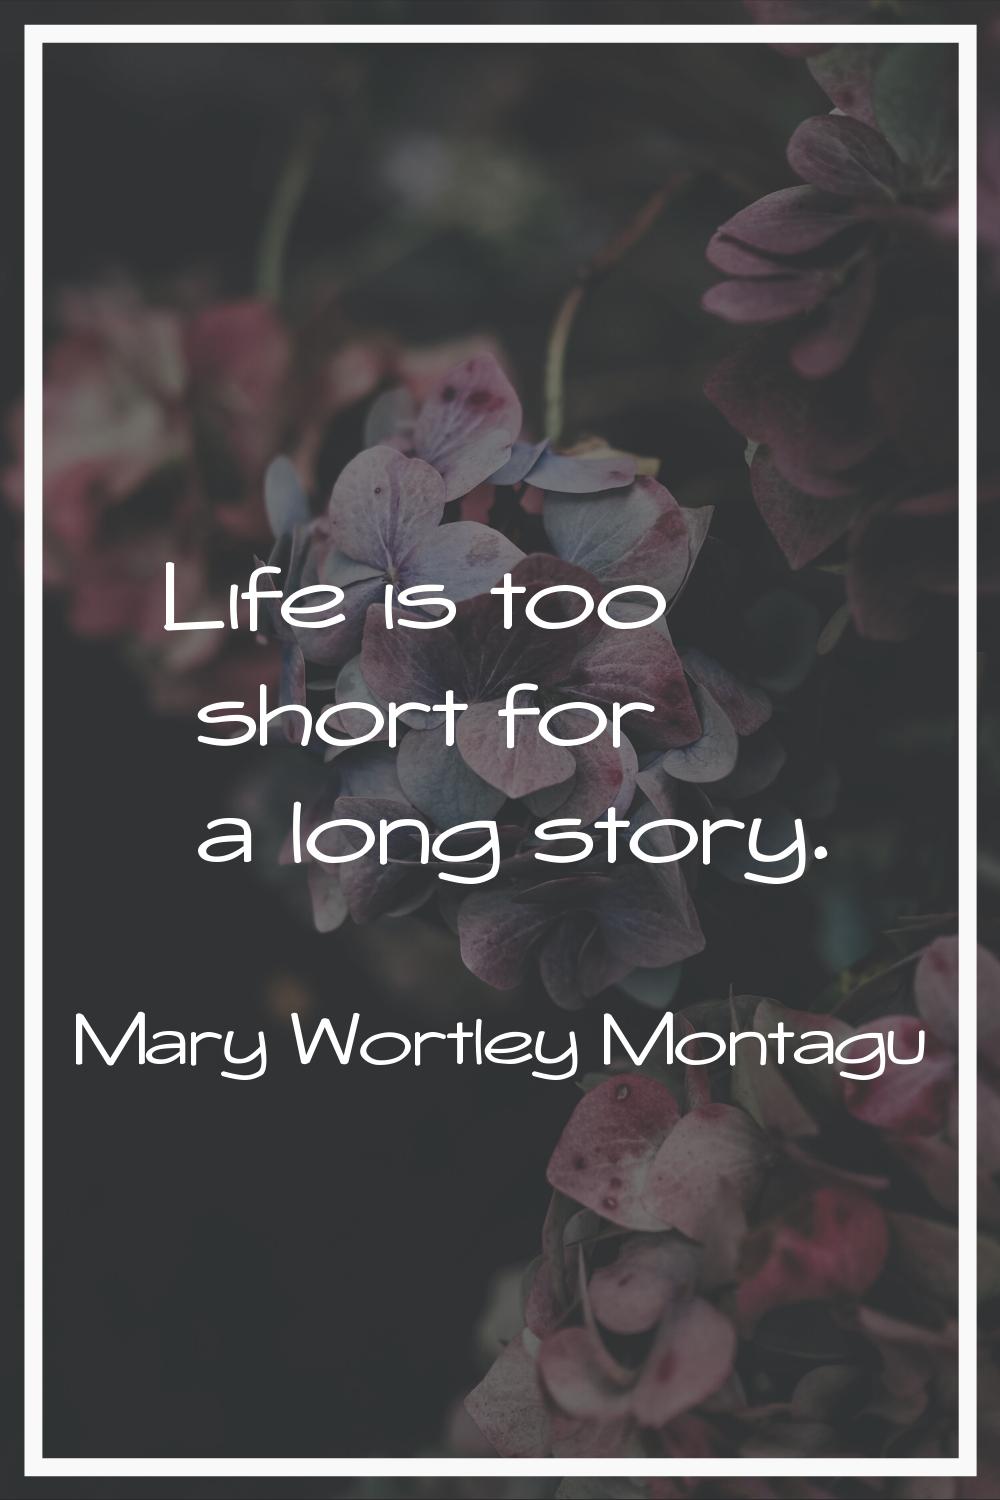 Life is too short for a long story.